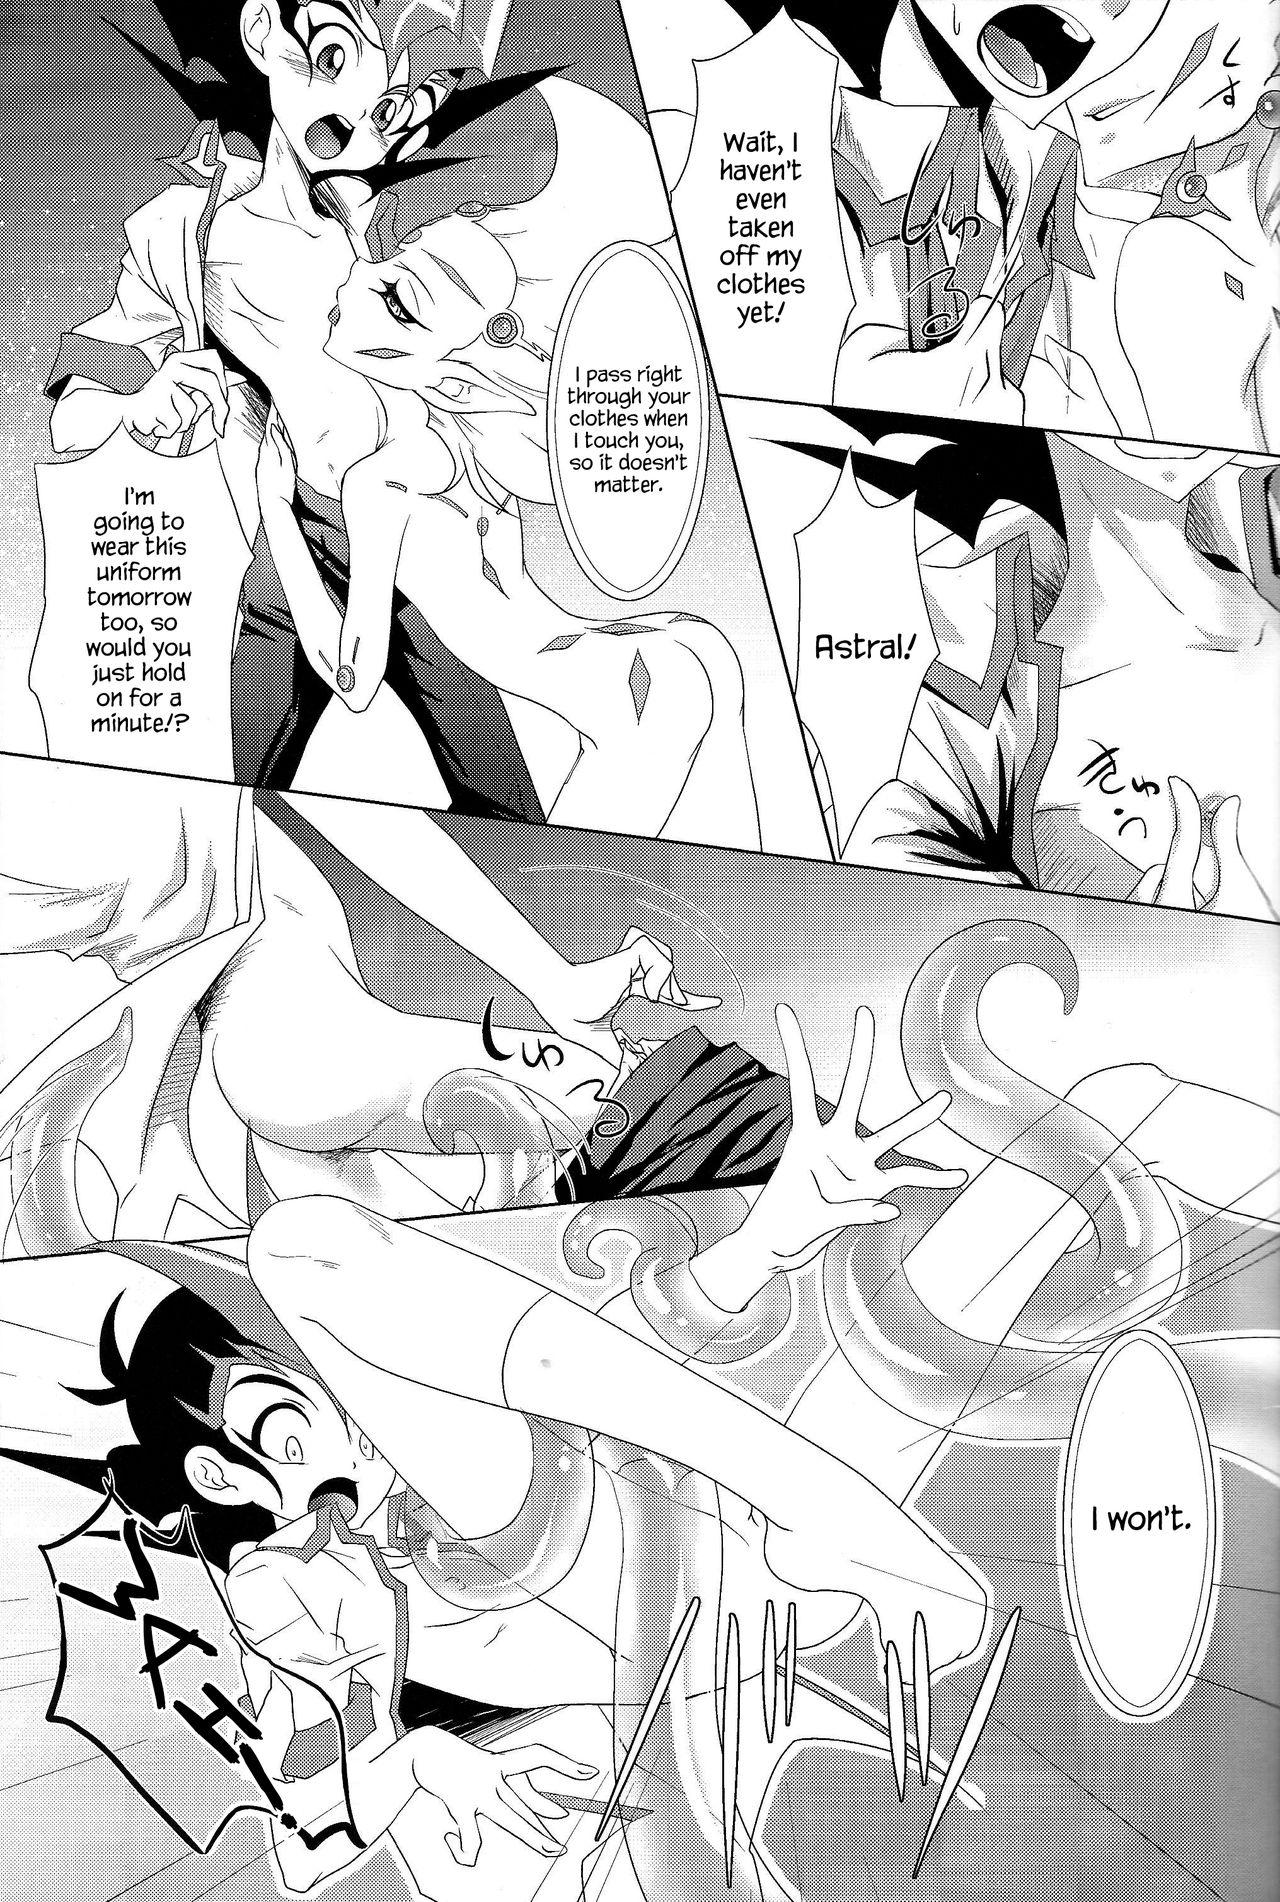 Cheating tentacle rape - Yu-gi-oh zexal Publico - Page 6